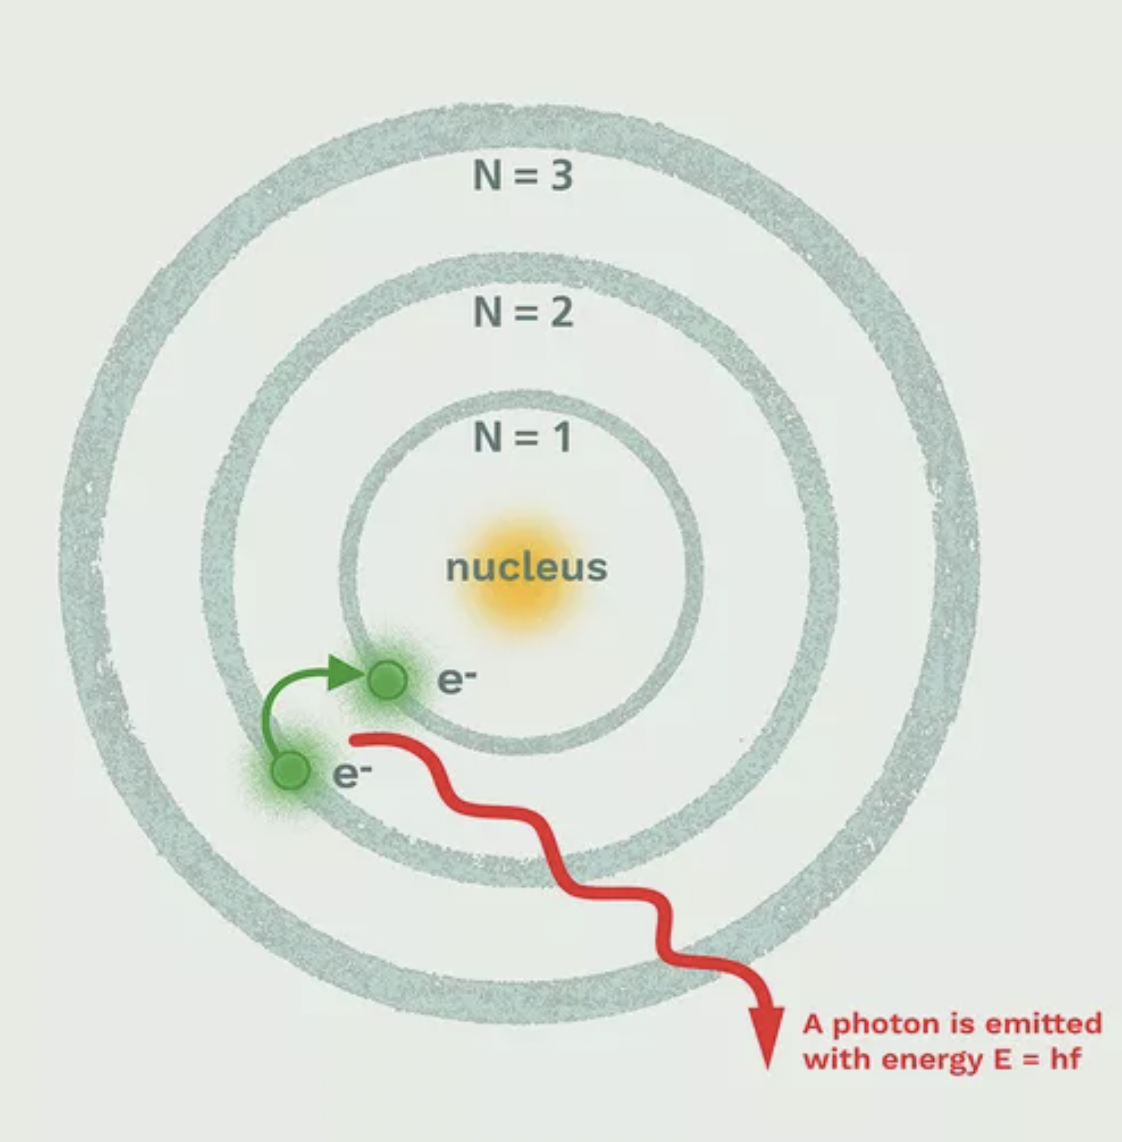 <ul><li><p>Electrons are in ORBIT around the nucleus @ specific distances with specific amounts of energy</p></li><li><p>Each electron has a &quot;ground state&quot;/normal.</p></li><li><p>Electrons jump UP to higher state (absorb energy). Higher state = &quot;excited state&quot;.</p></li><li><p>Electron jumps DOWN to &quot;normal state&quot;, releases energy in form of LIGHT.</p></li></ul>